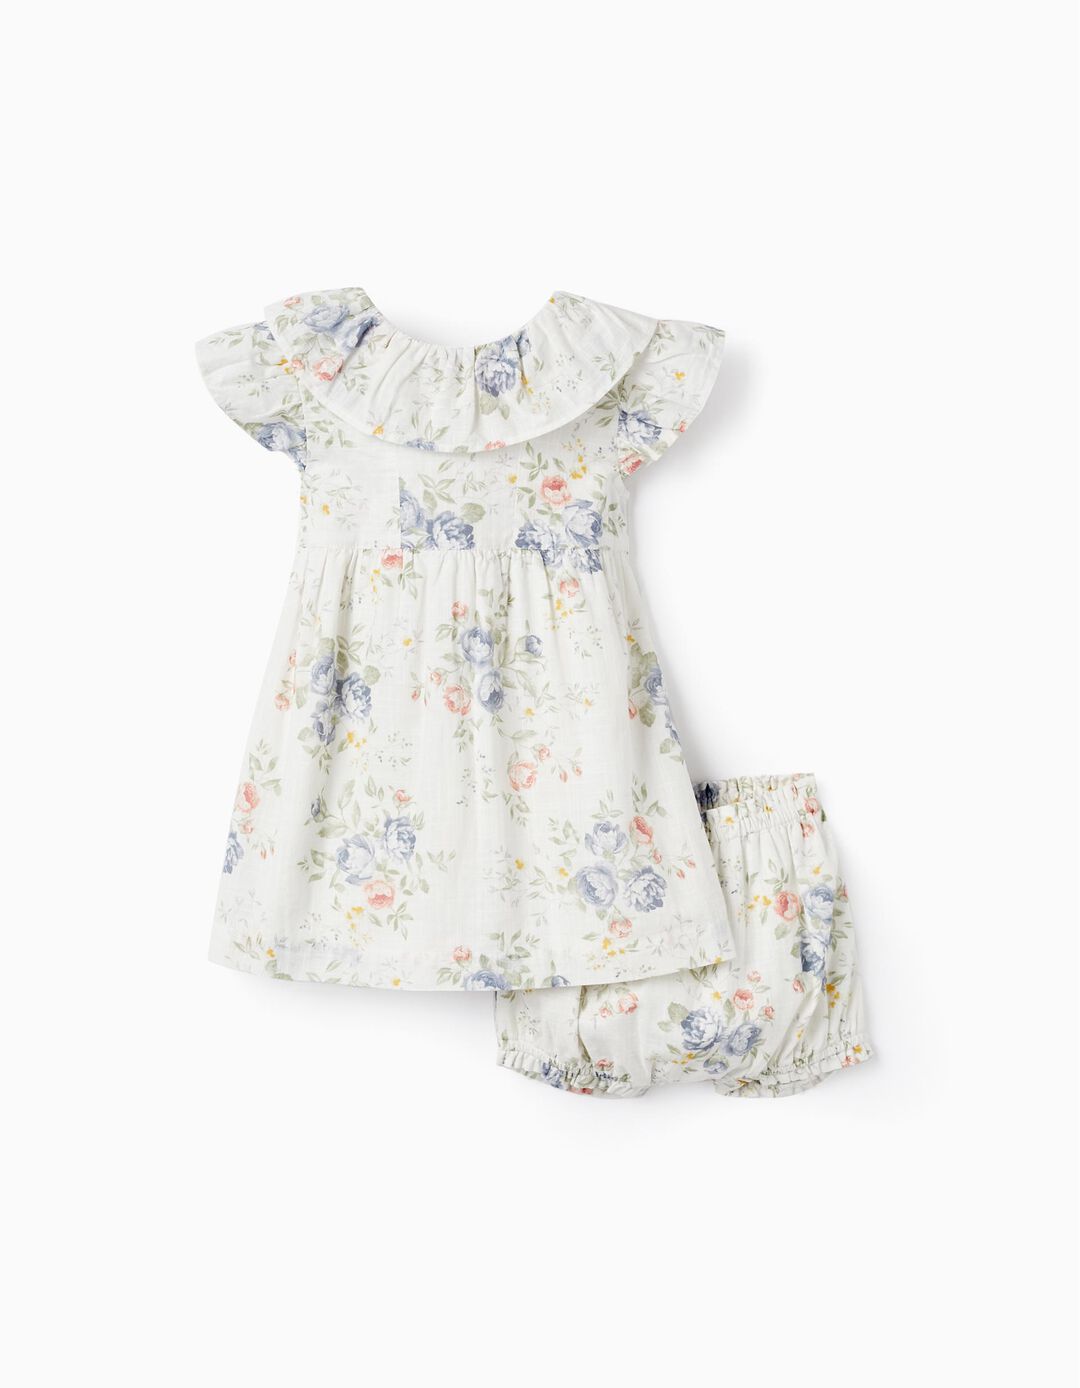 Dress + Cotton Diaper Cover for Baby Girls 'Floral', Multicolour